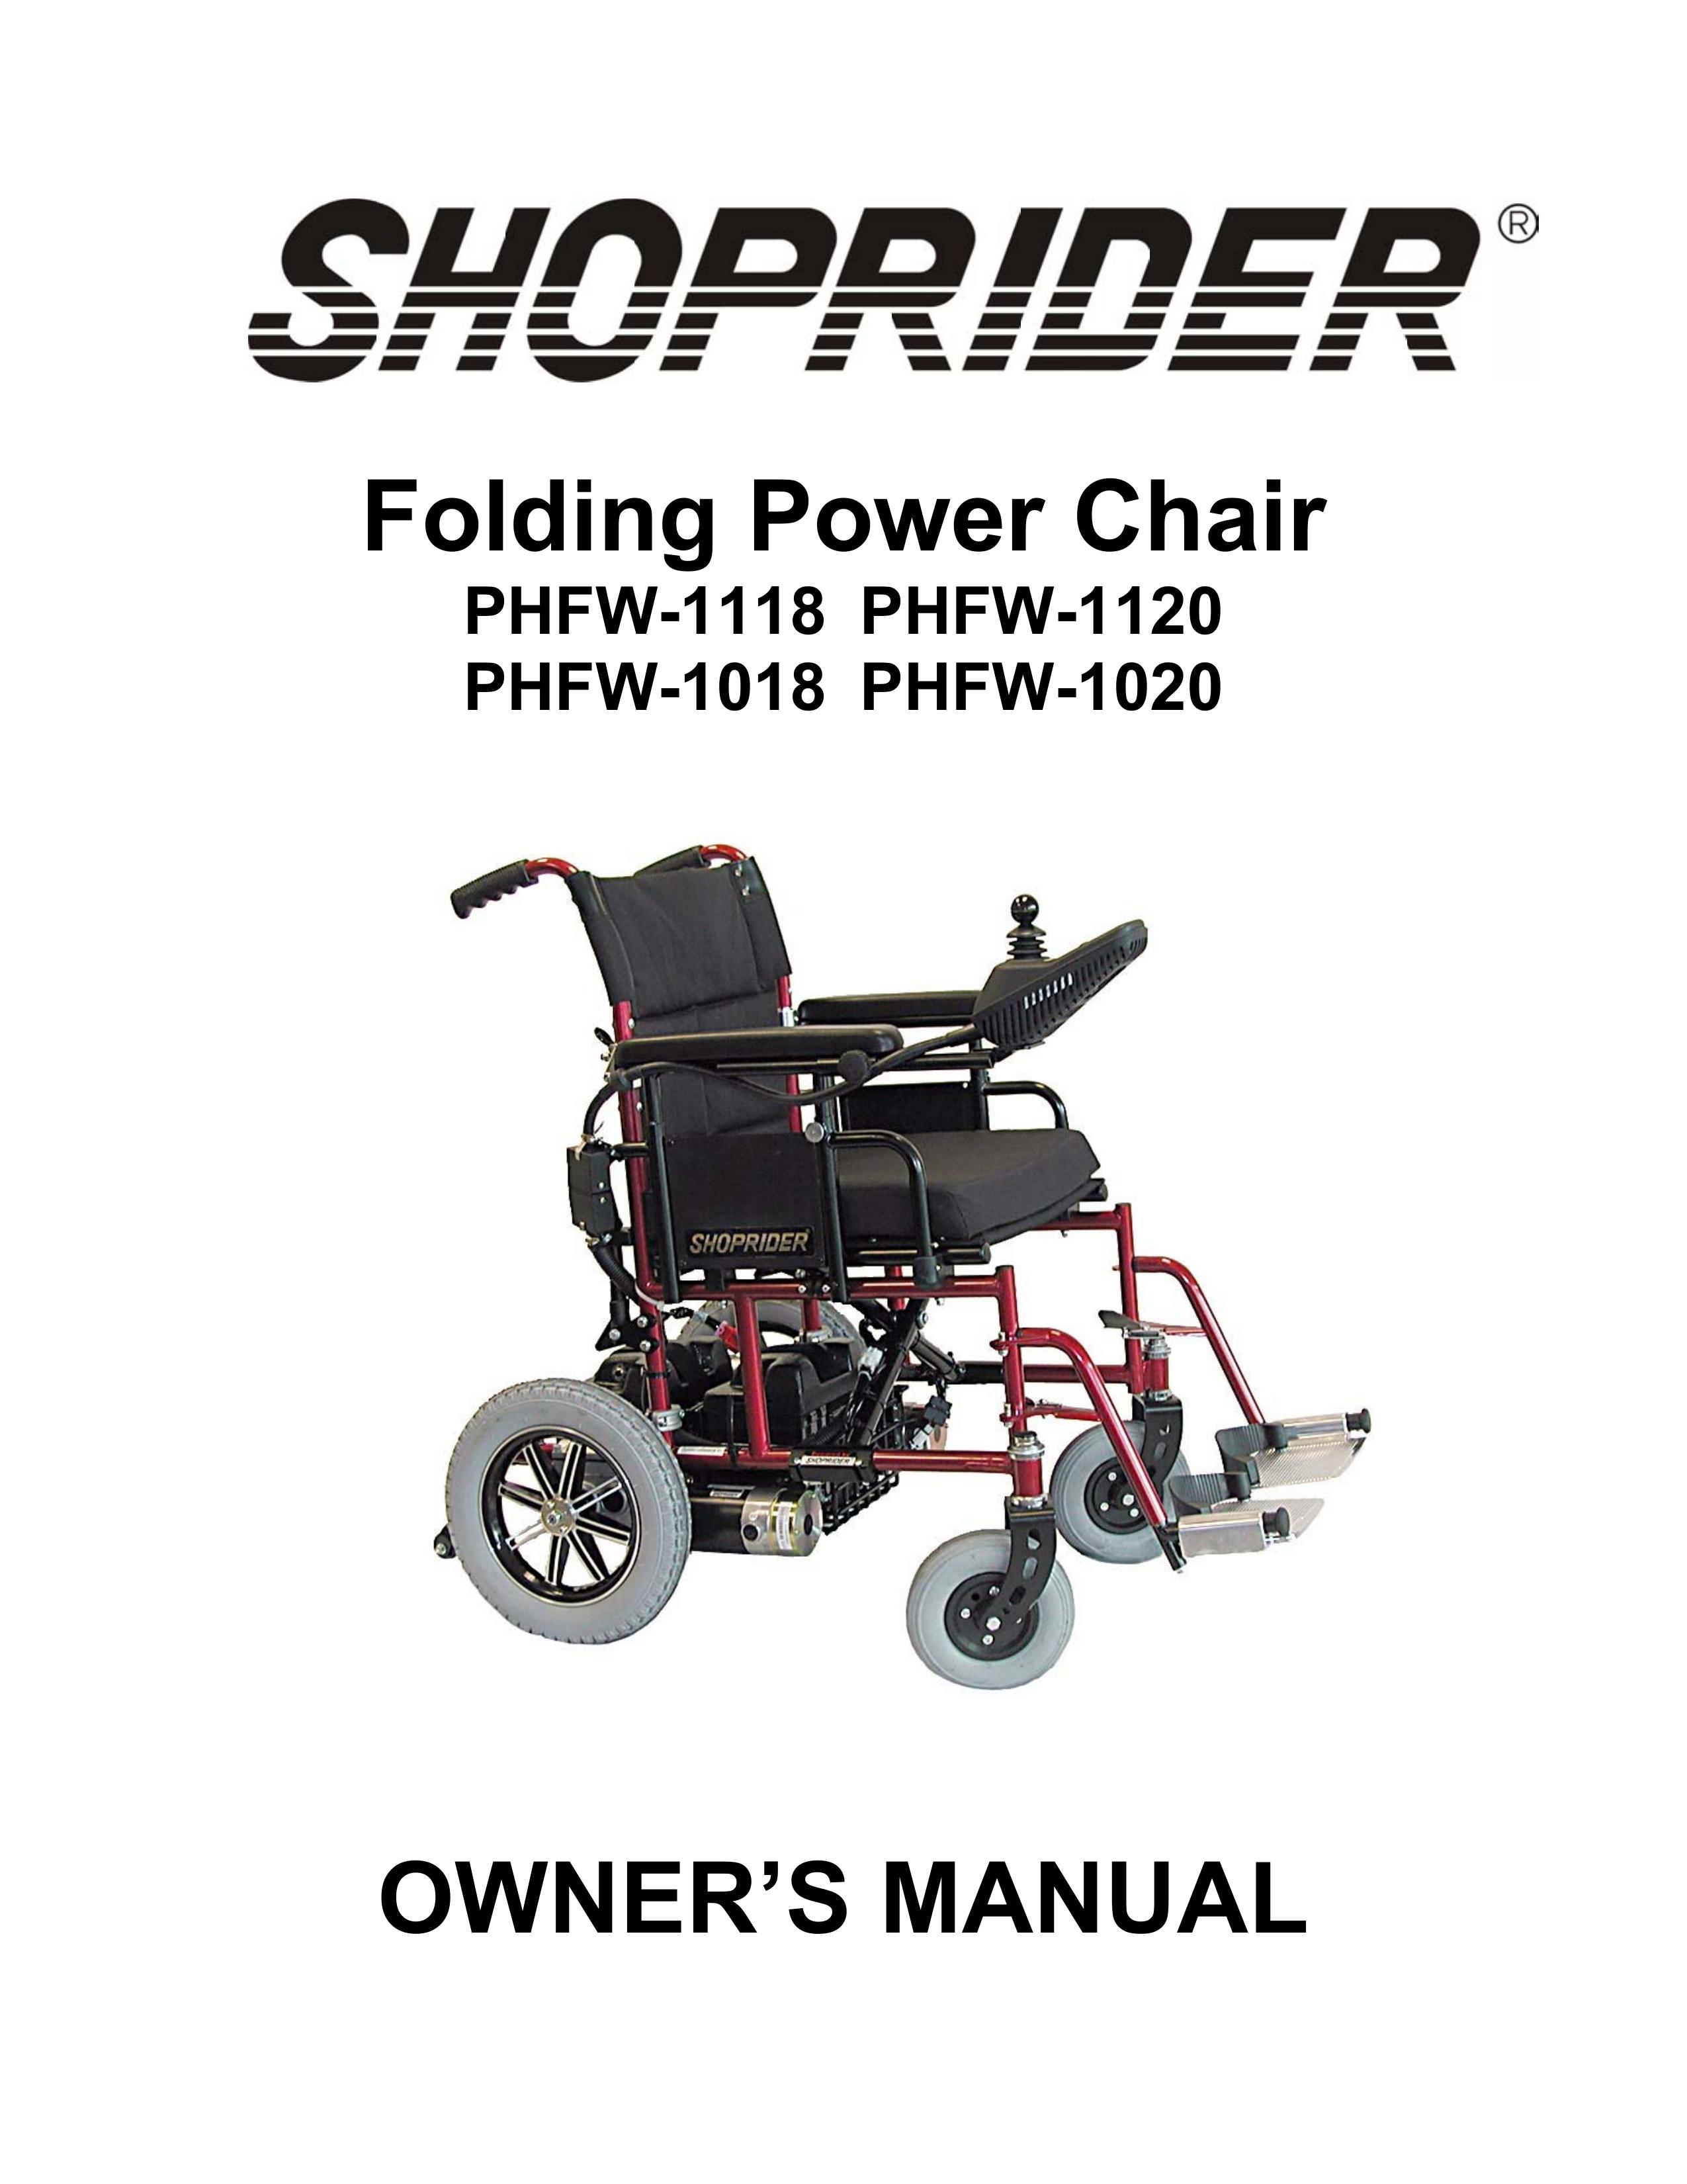 Shoprider PHFW-1018 Mobility Aid User Manual